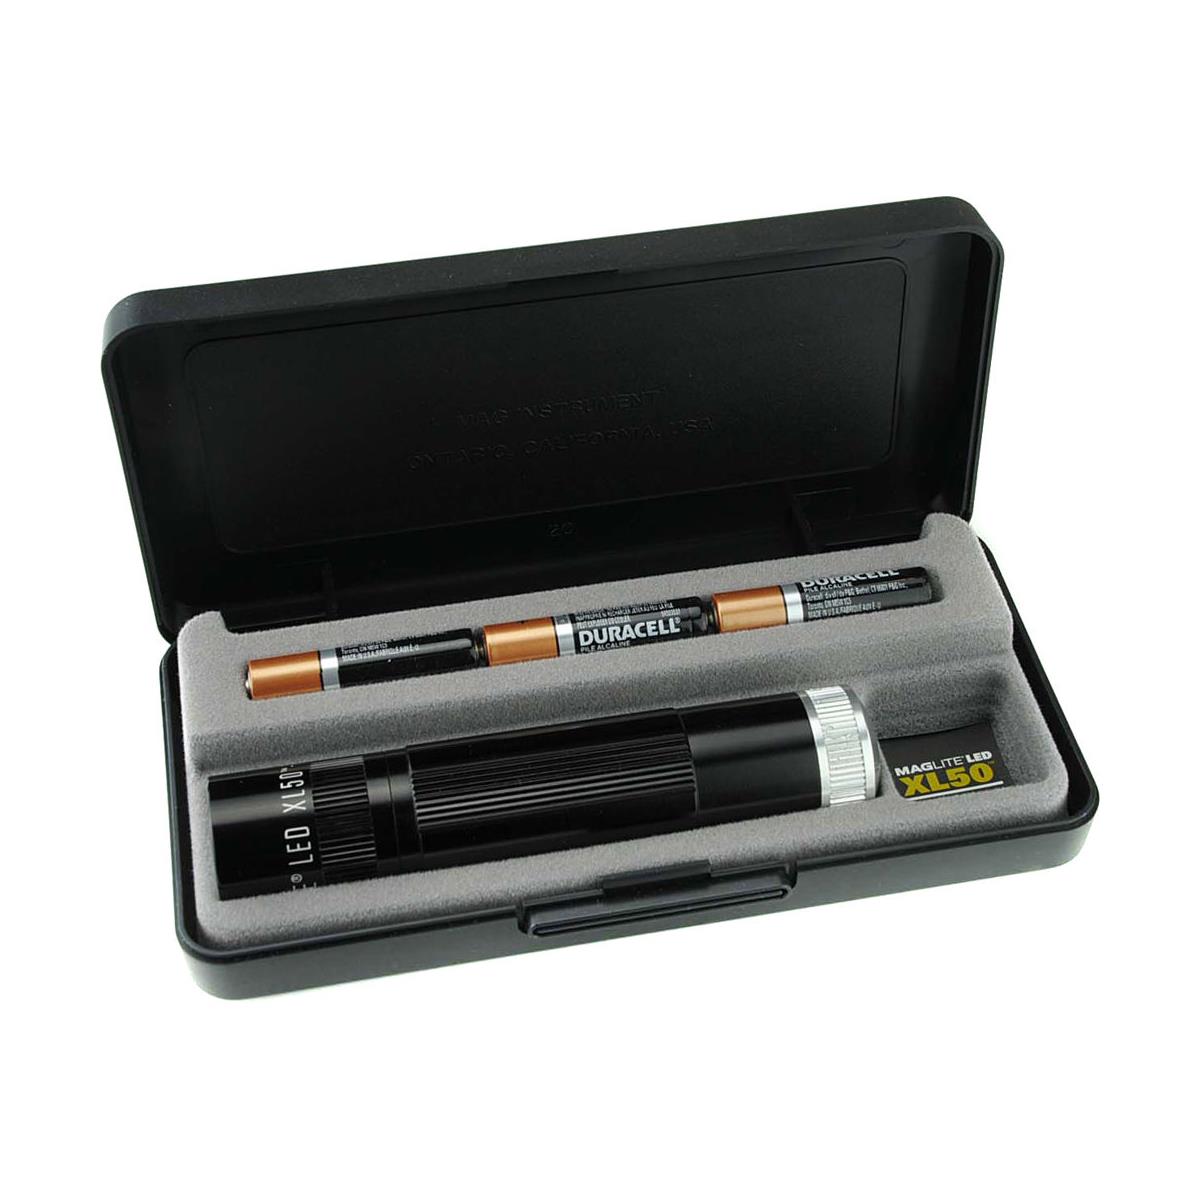 Image of MagLite Spectrum XL50 3-Cell AAA Warm White LED Flashlight